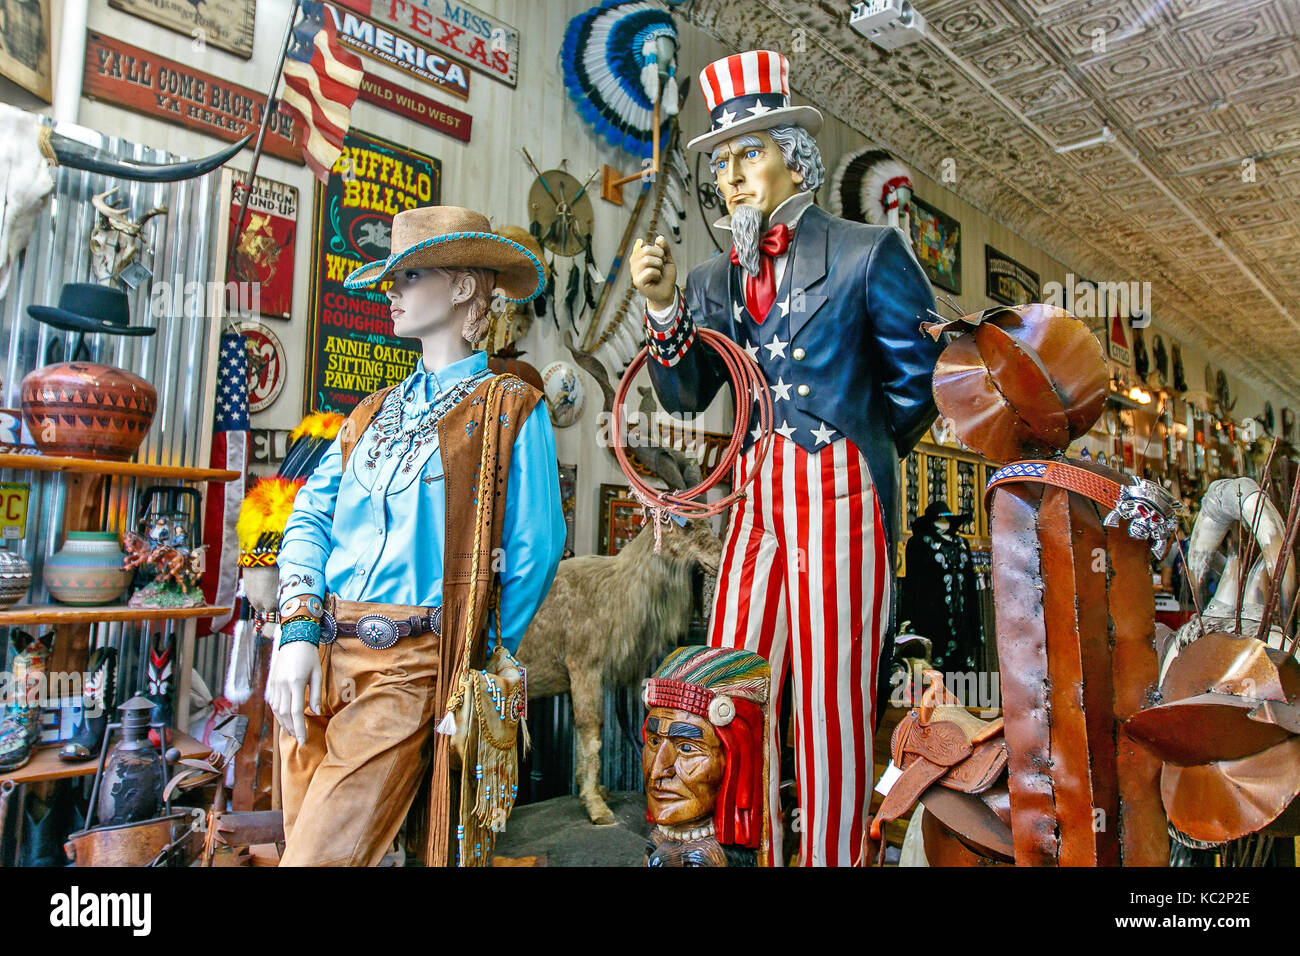 Colorful wooden statues of Uncle Sam and a cowgirl dressed in blue shirt stand among a variety of other items in a Wild West store. Stock Photo